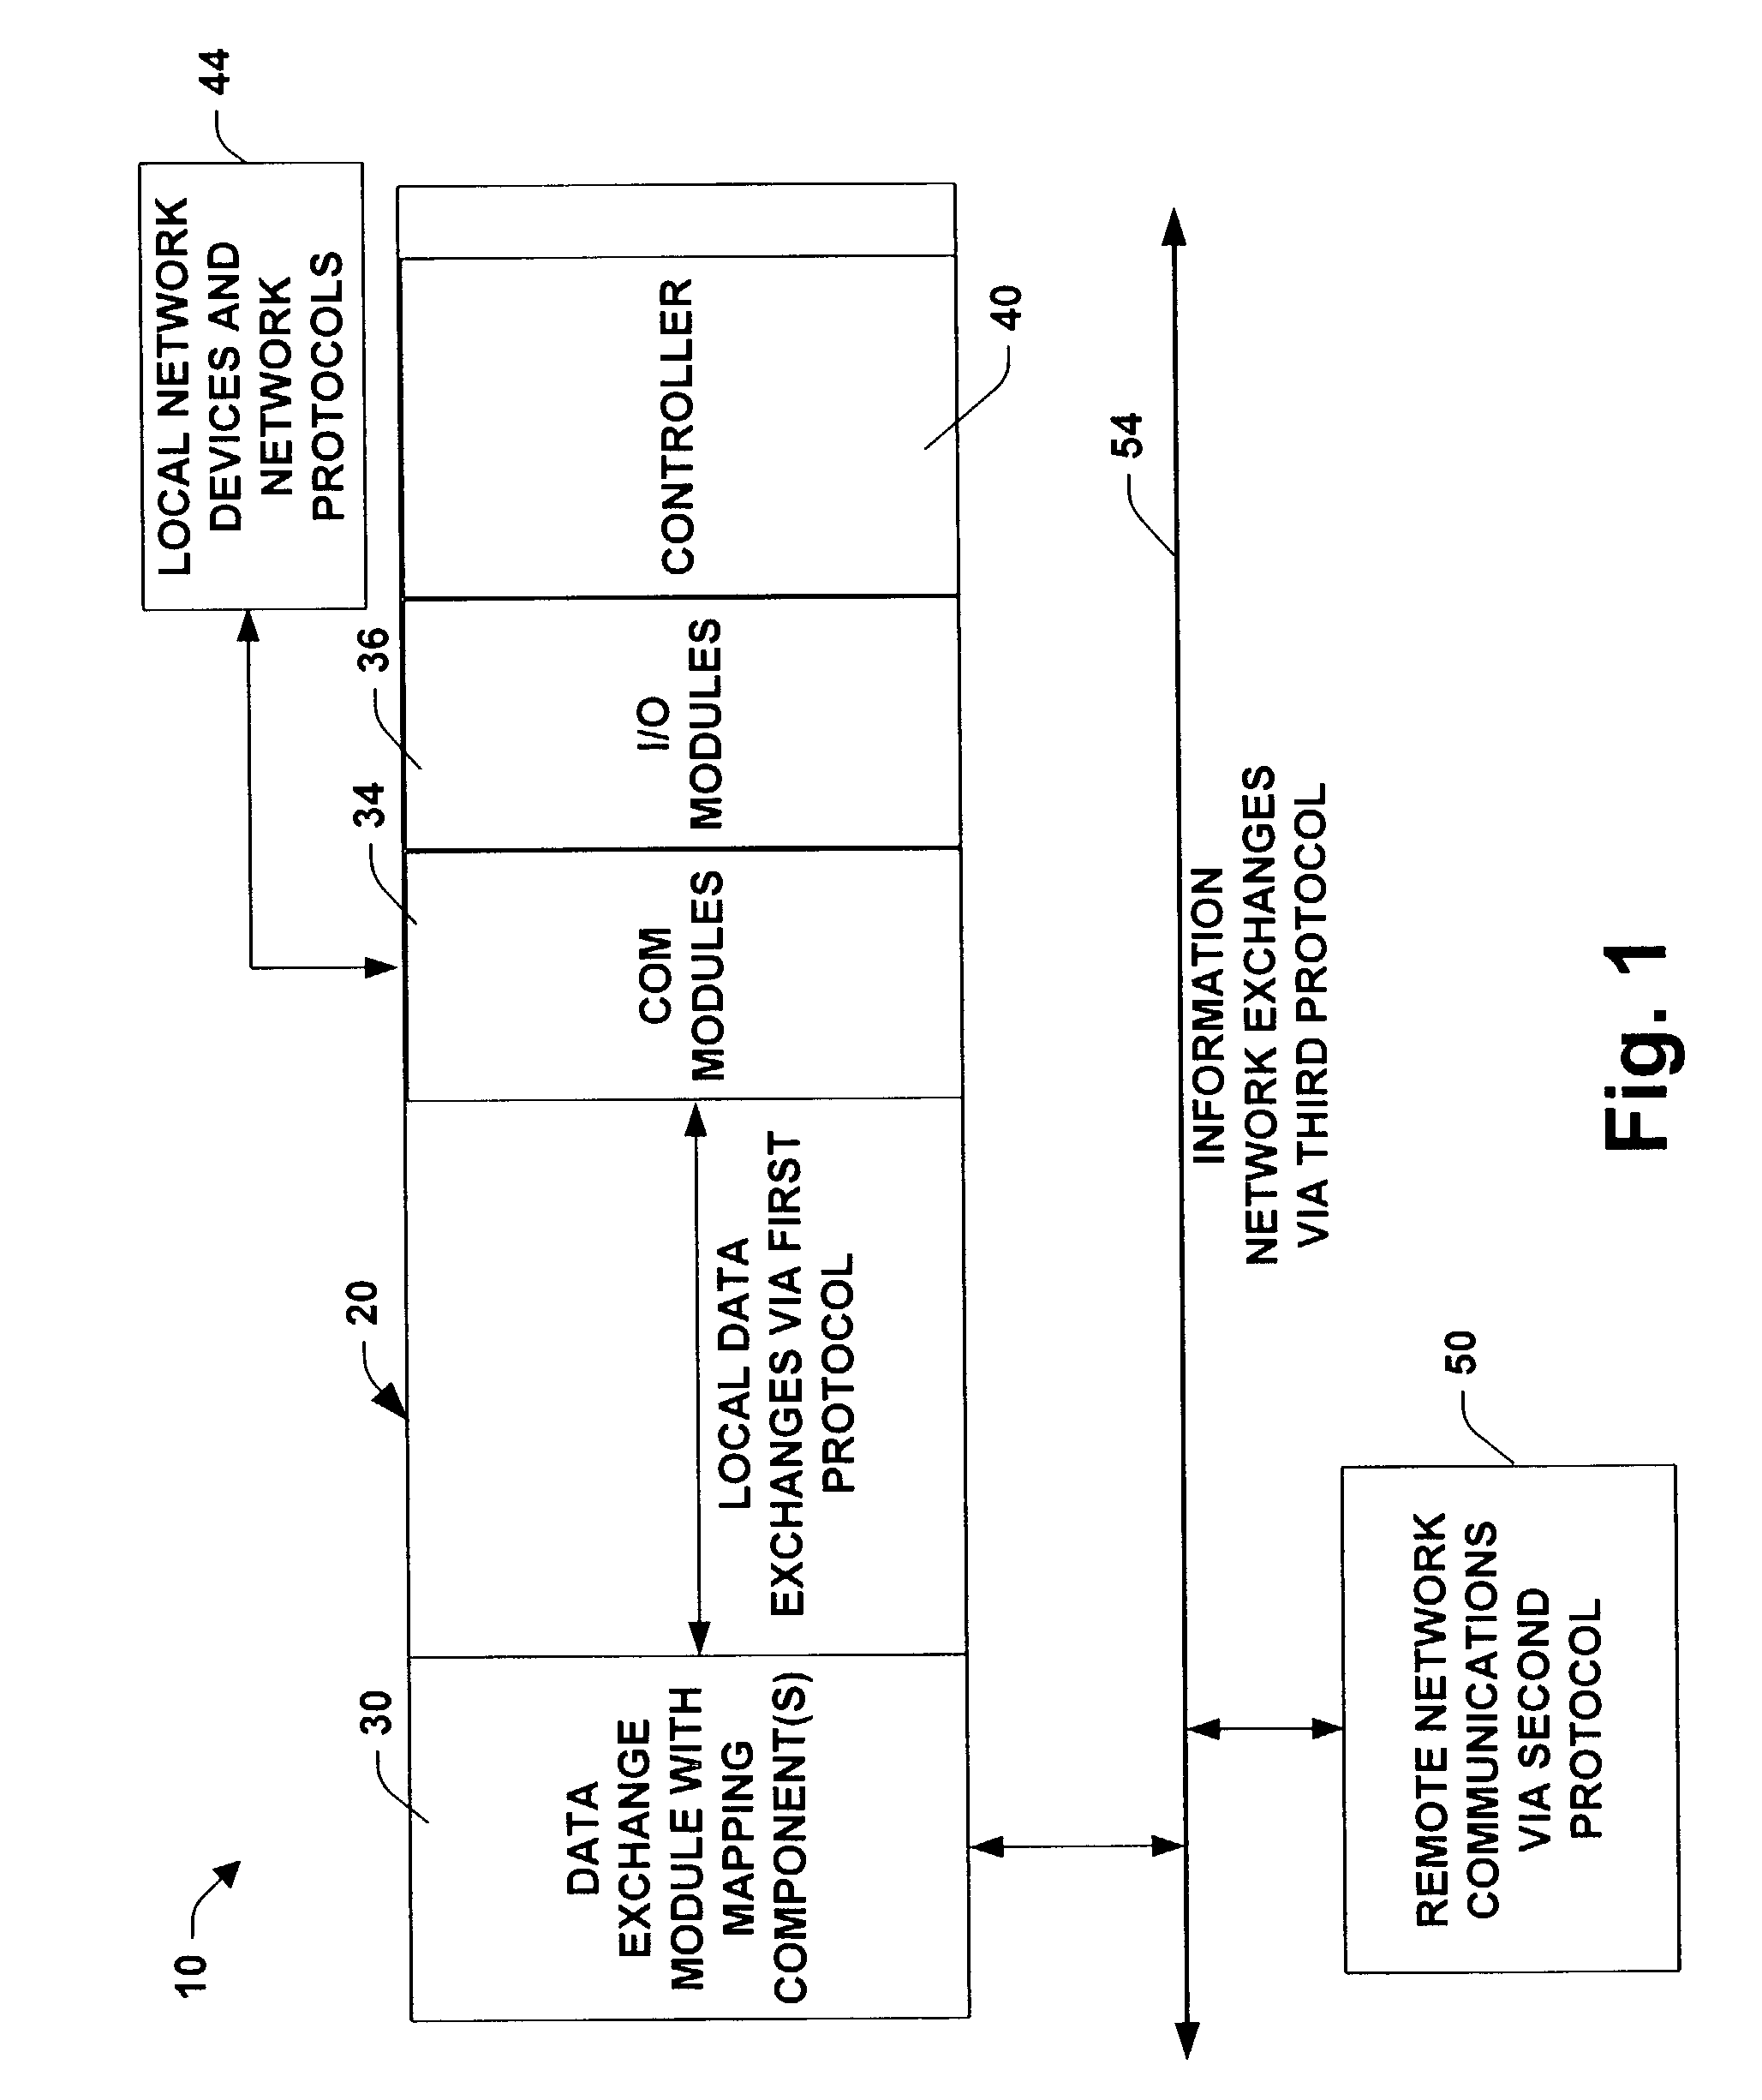 System and methodology providing network data exchange between industrial control components